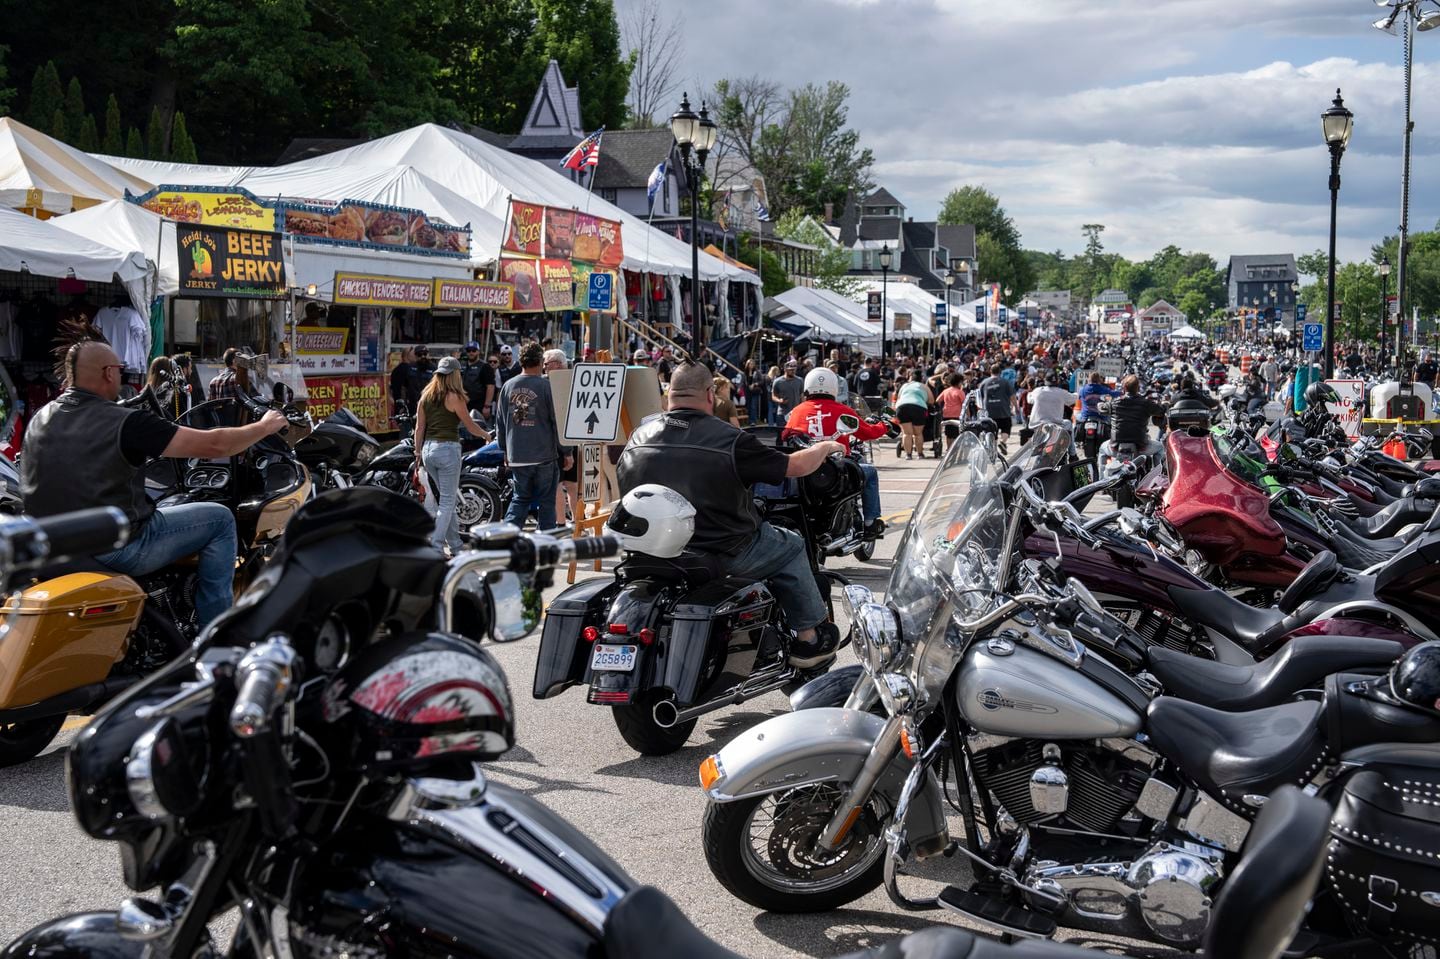 Motorcyclists come from all over the country, and other parts of the world, for the annual Laconia Motorcycle Week.